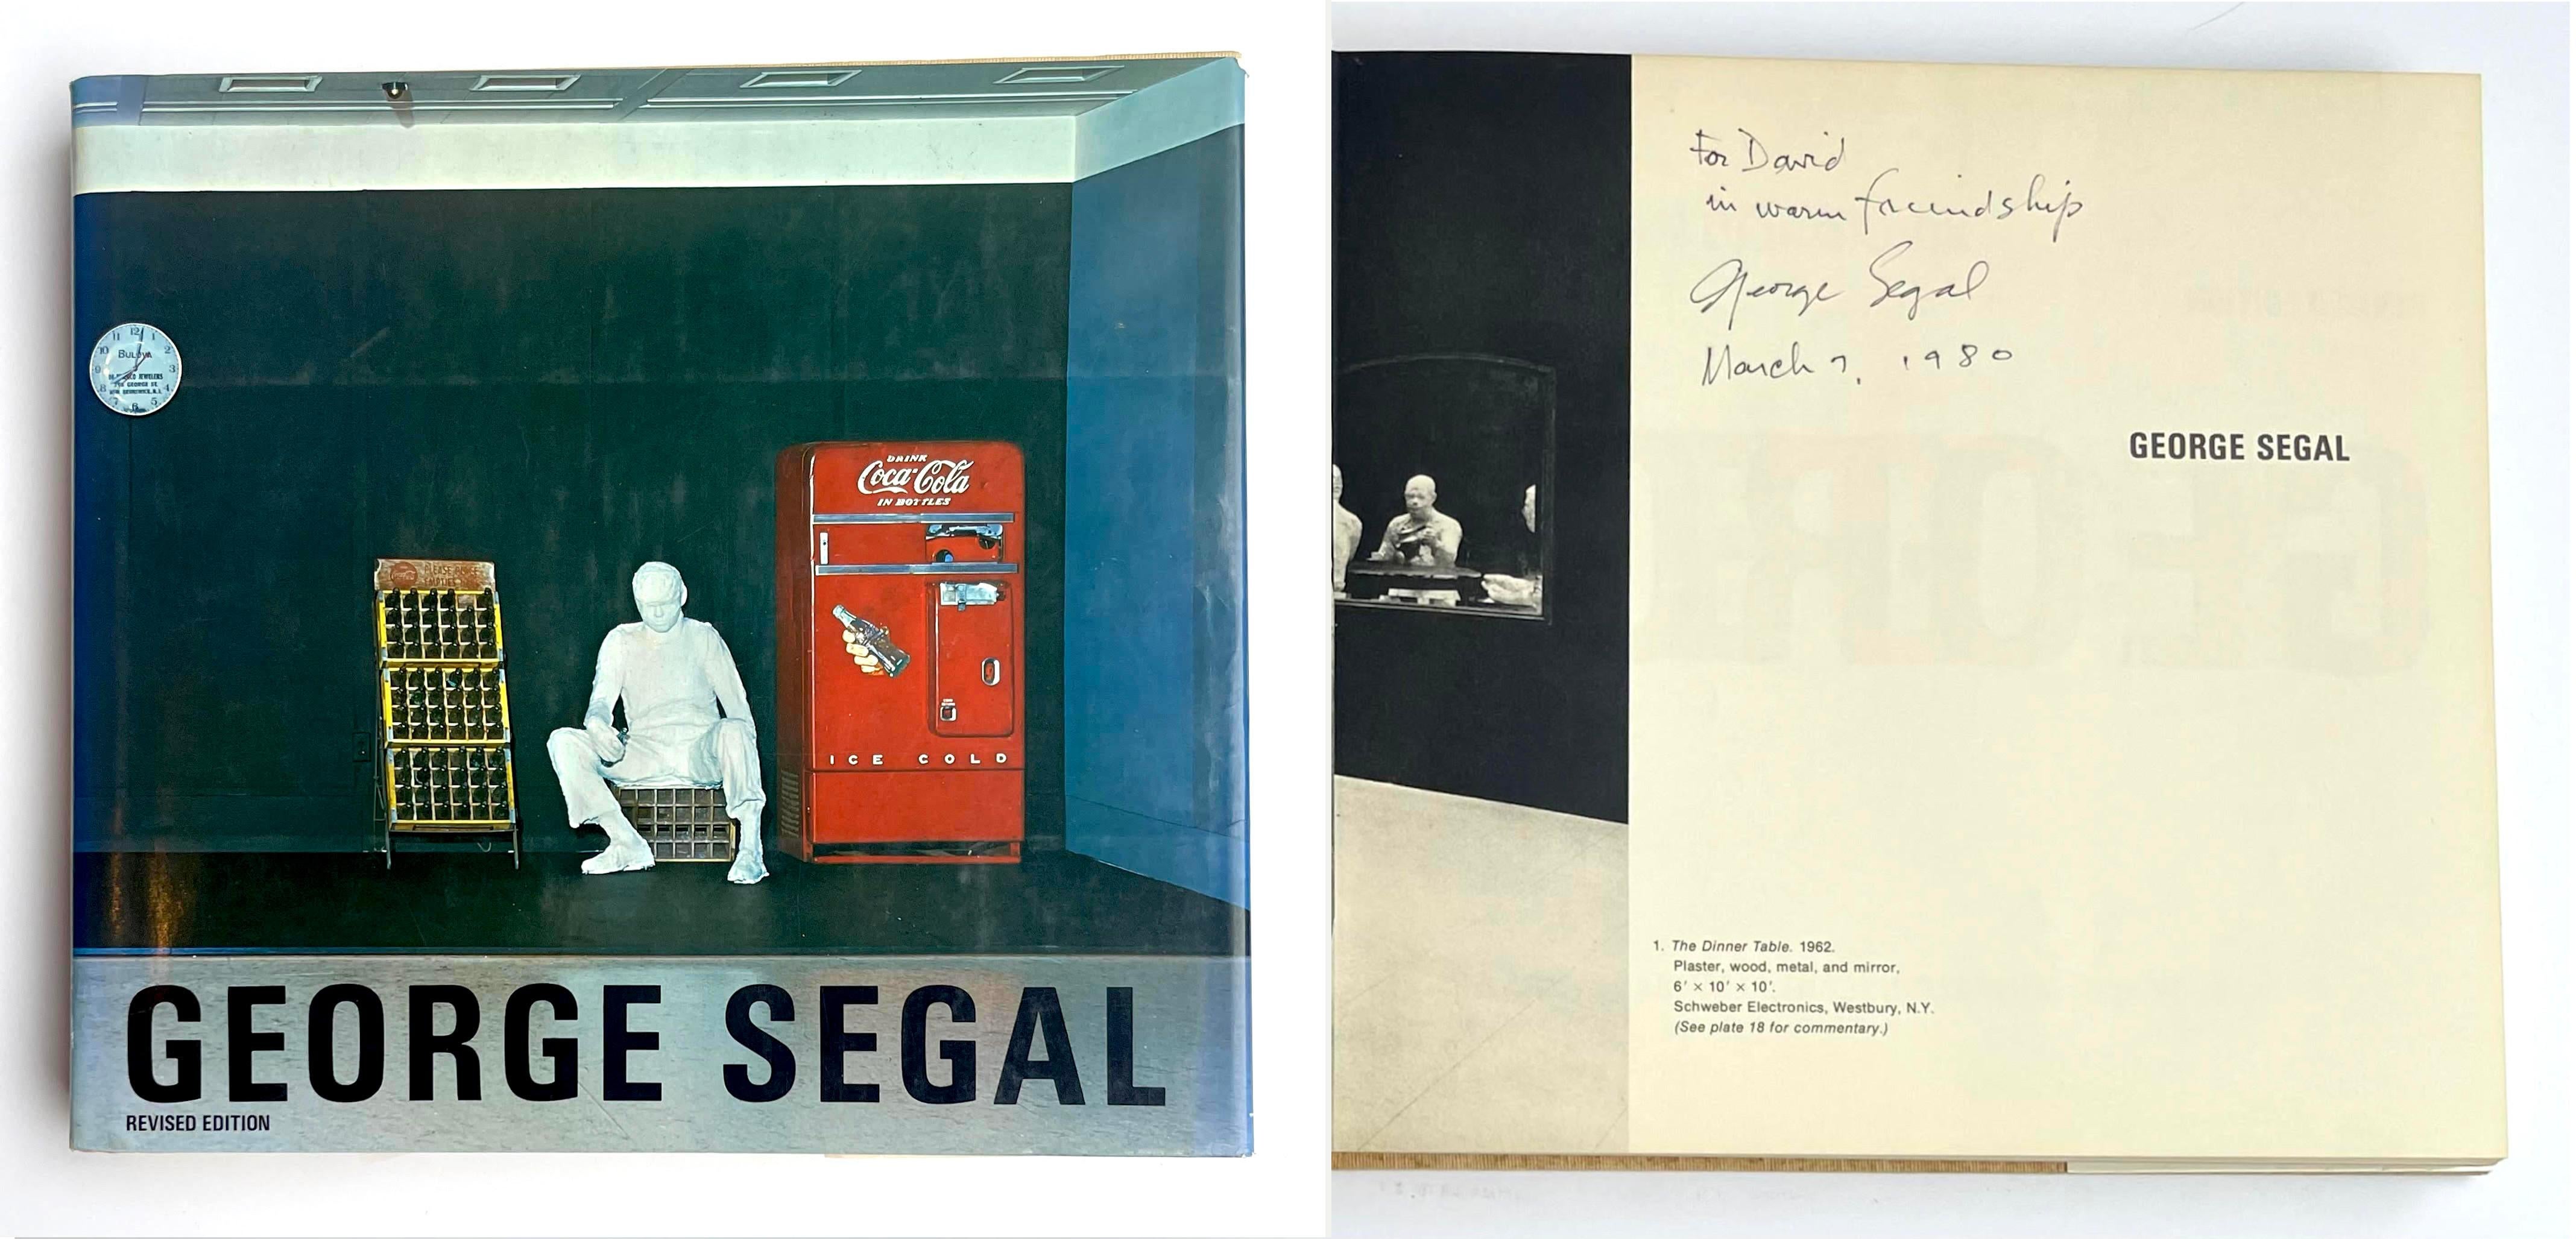 George Segal hardback monograph  (Hand signed, dated and inscribed)